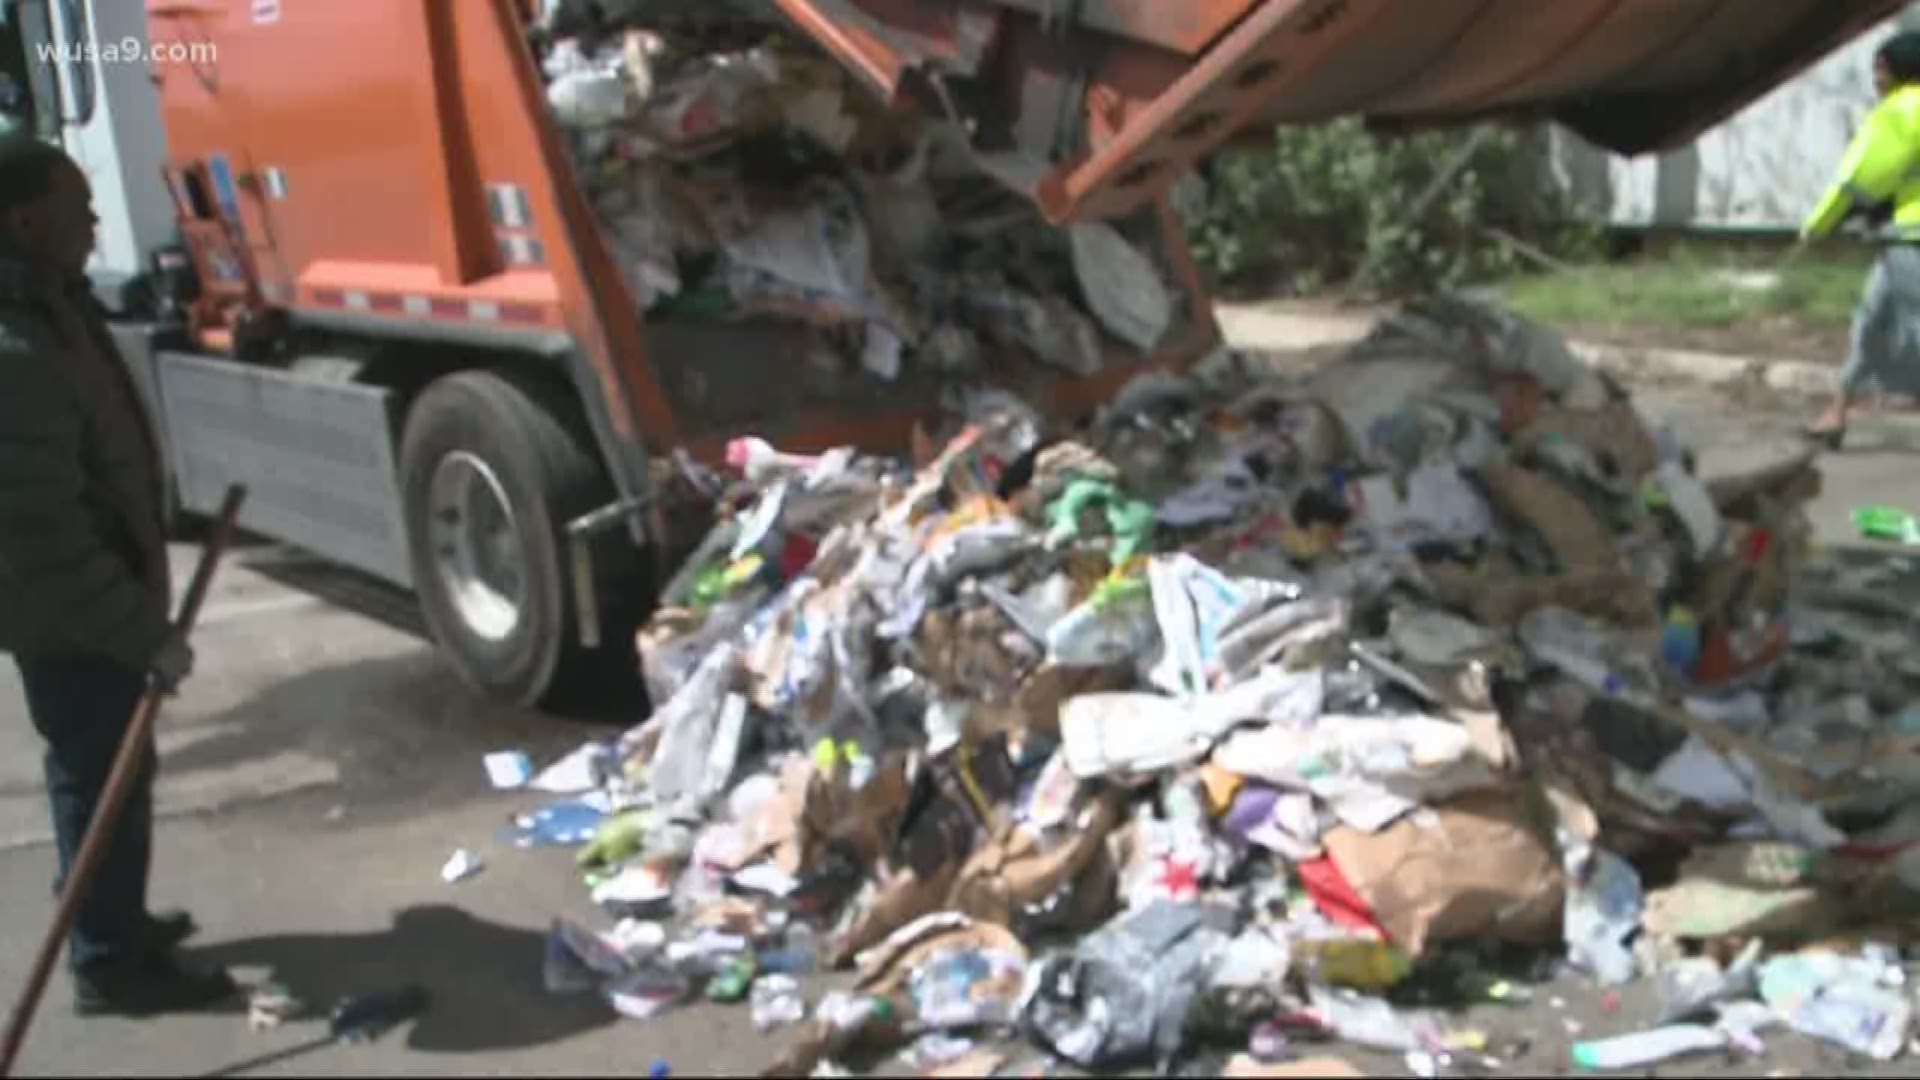 A viewer asked if the District really recycles what he puts out at the curb. So, we took him along for the ride to find out.